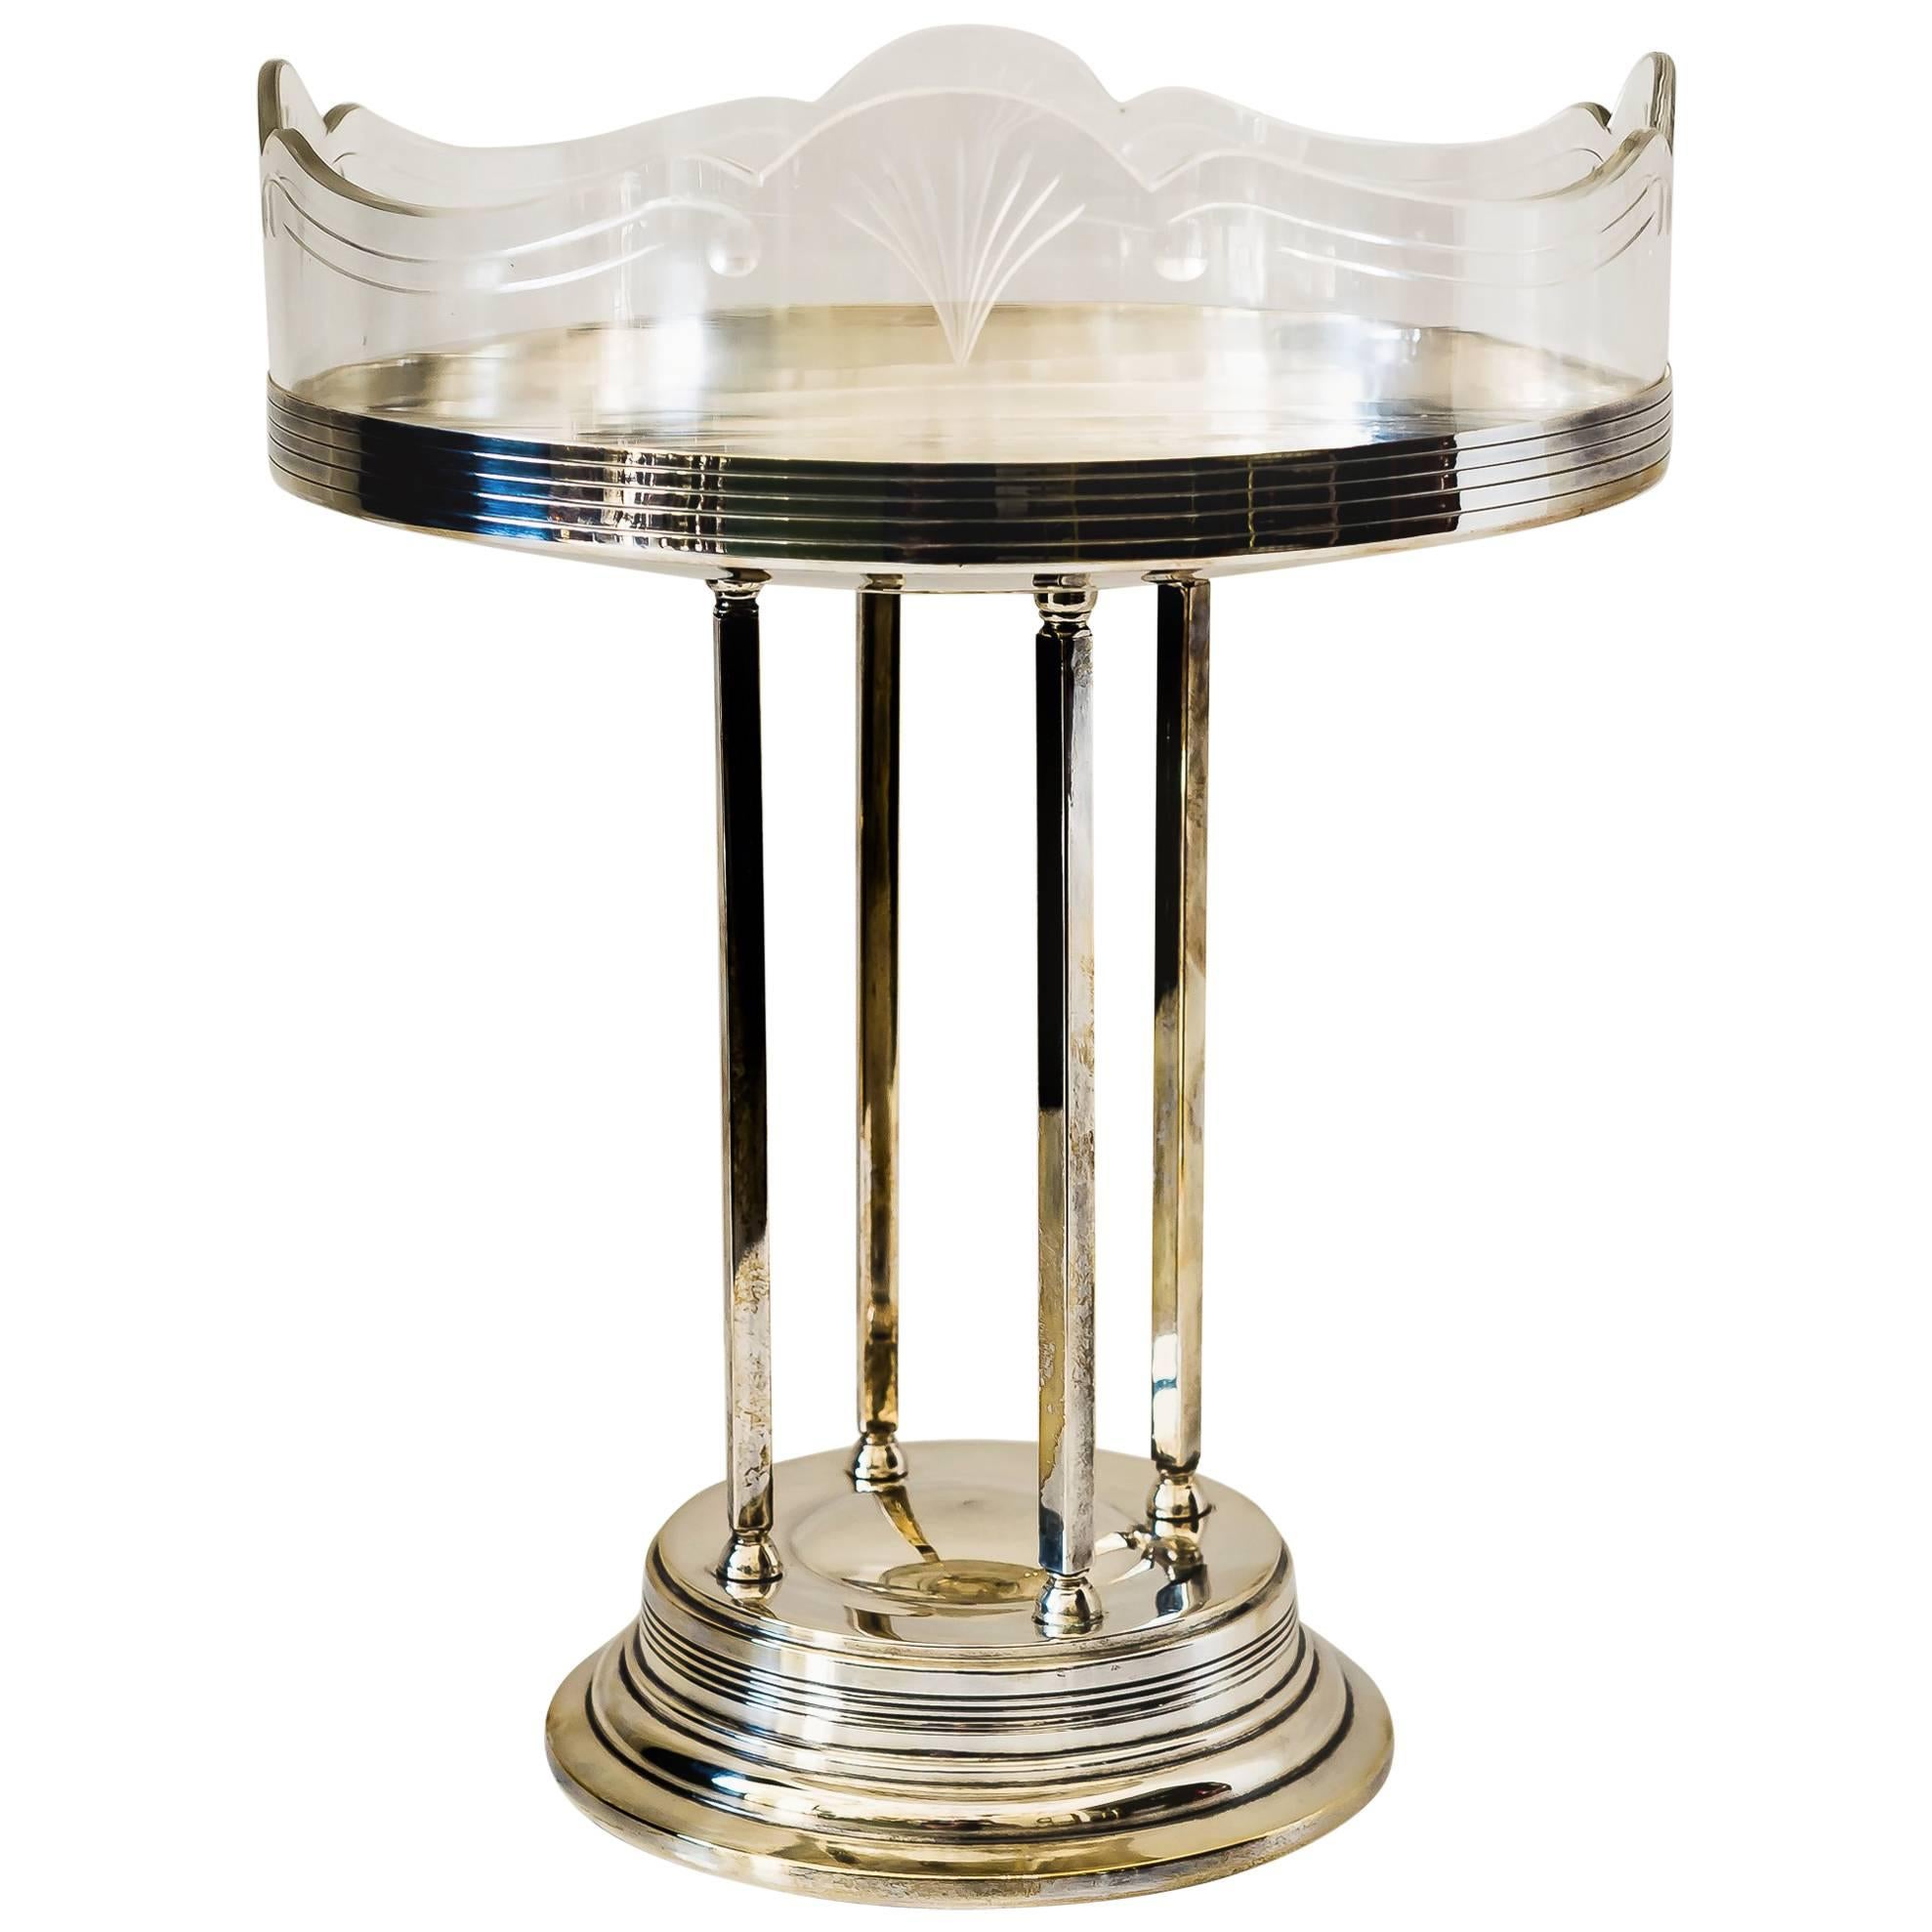 Silvered Fruit Centerpiece with Cut-Glass, circa 1910s